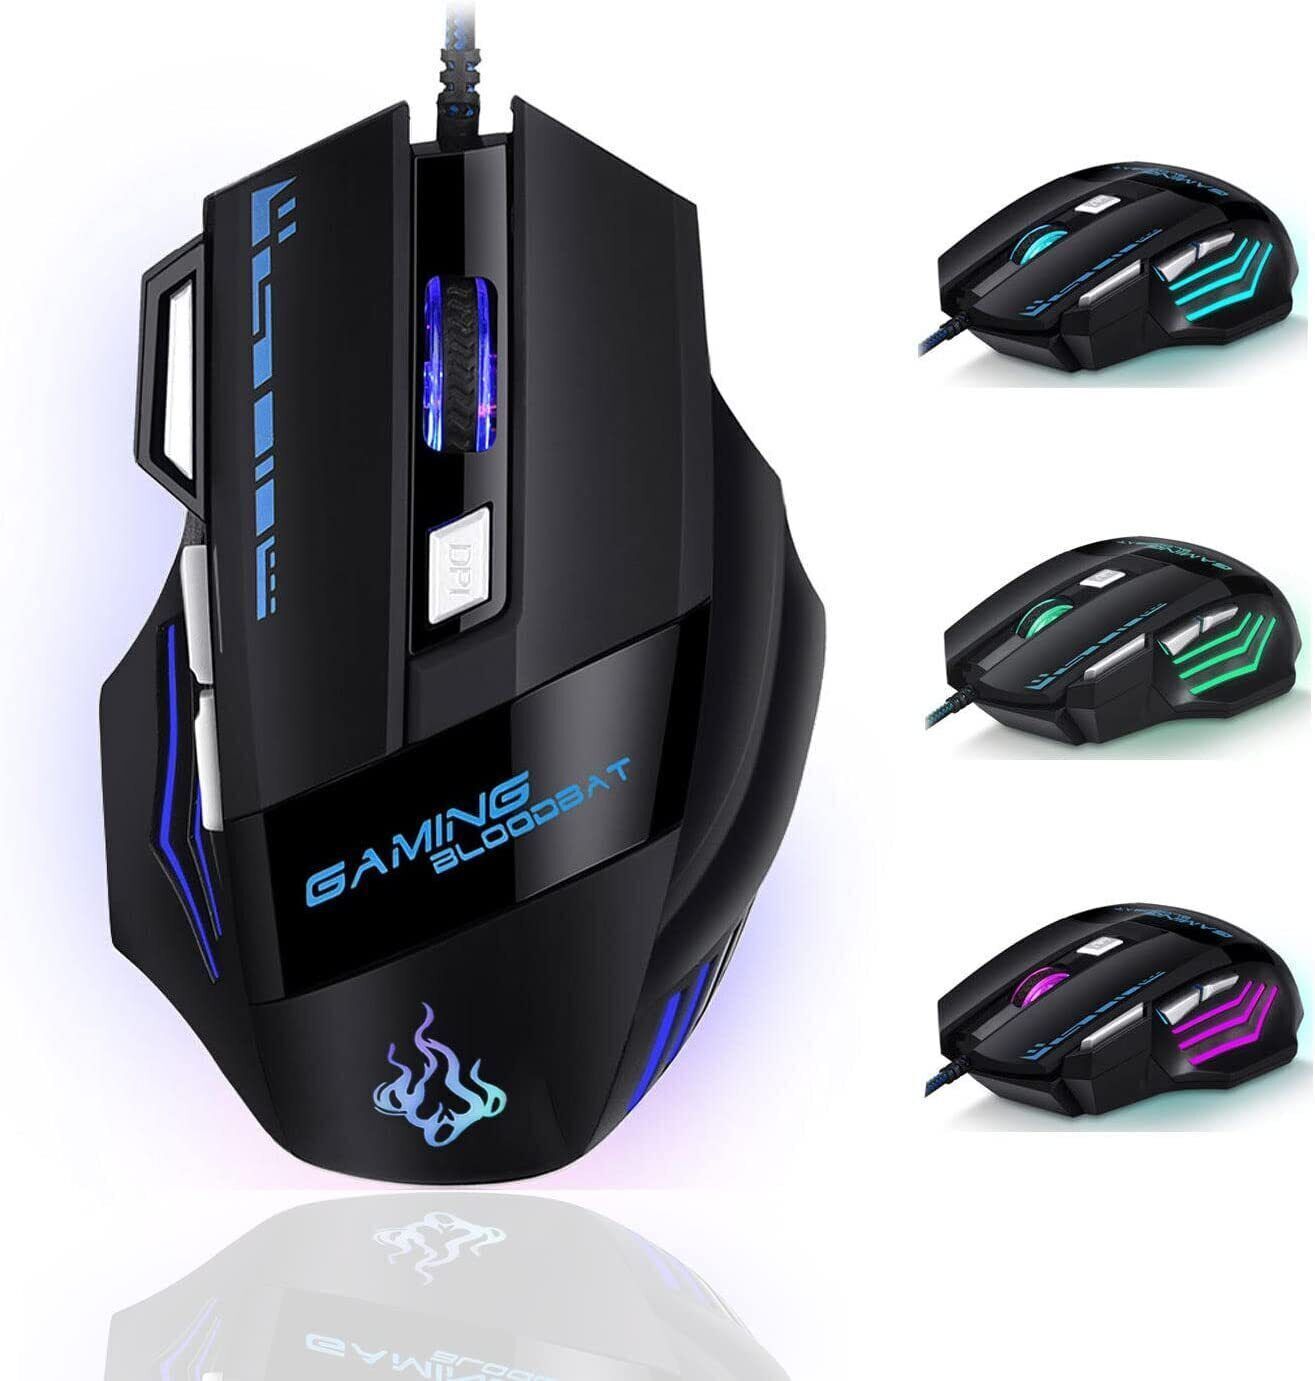 Gaming Mouse 7 Button USB Wired LED Breathing Fire Button 3200 DPI Laptop PC